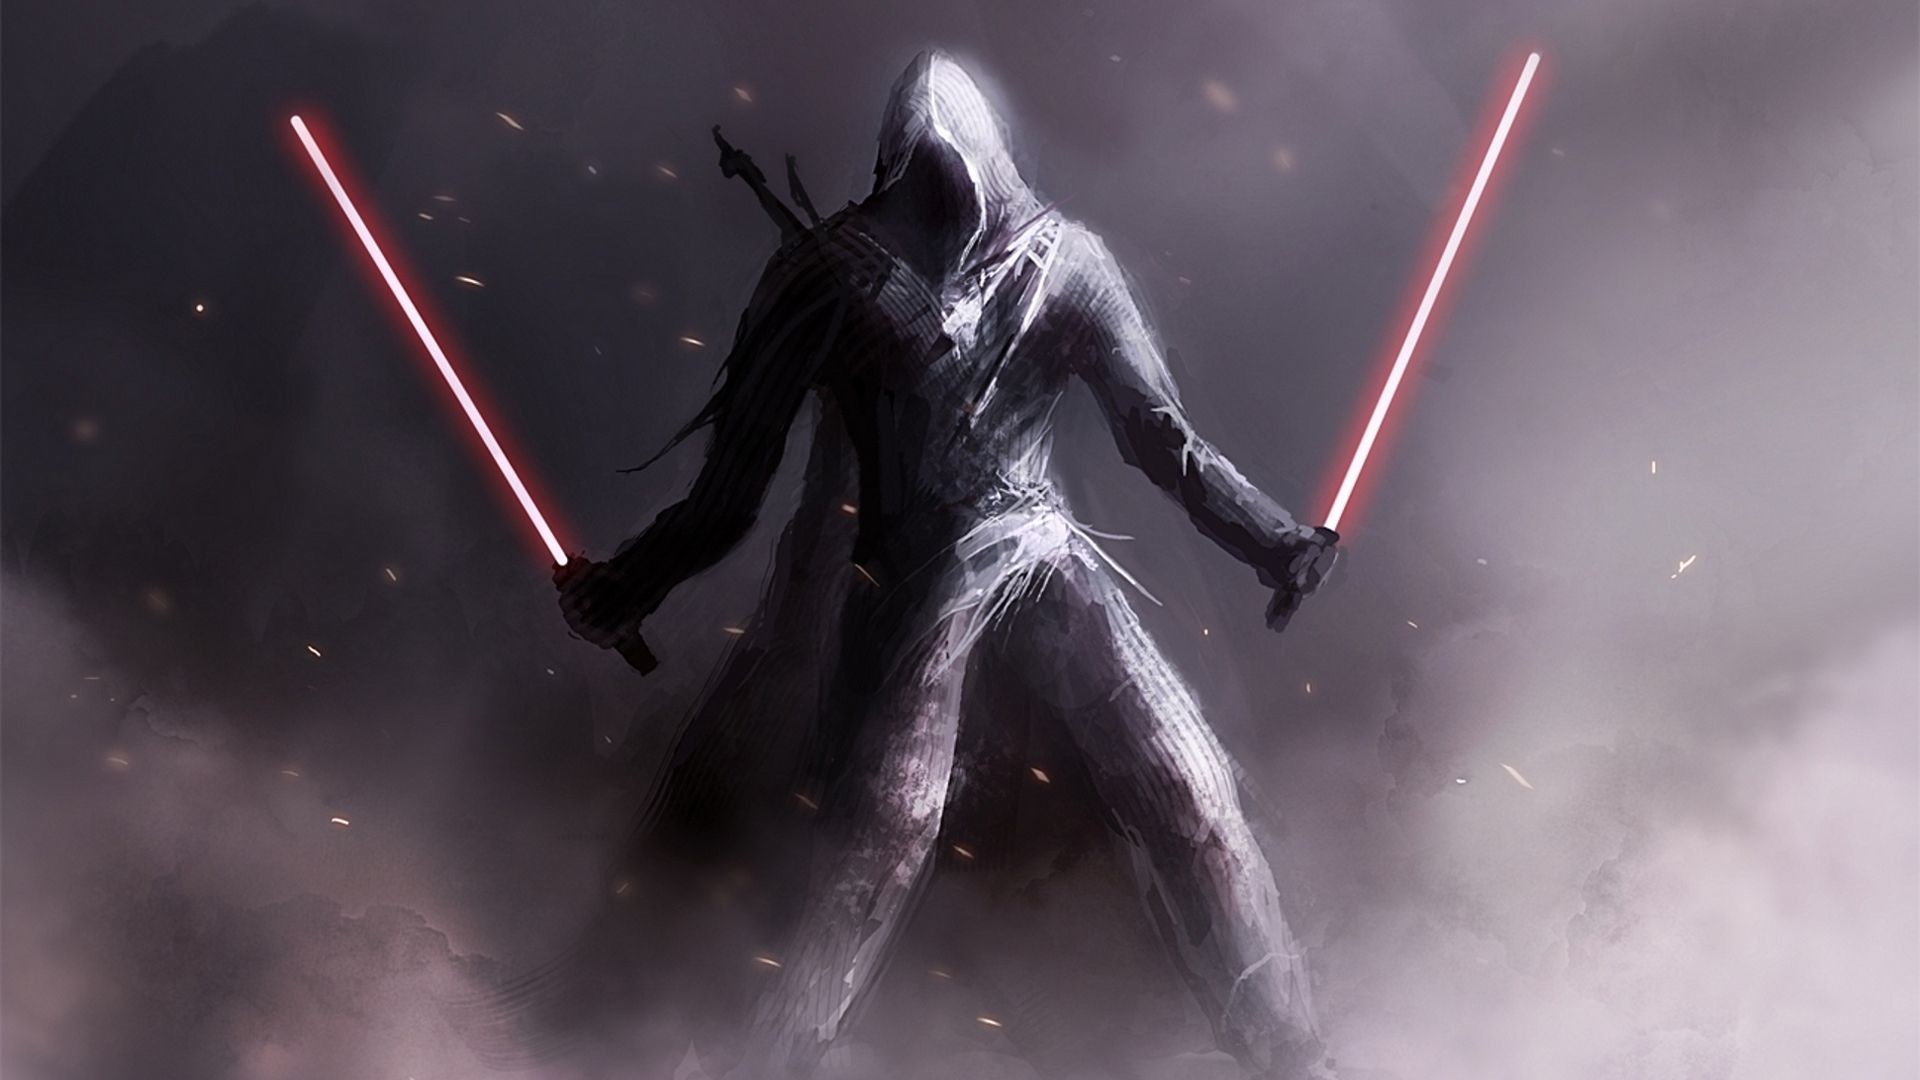 1920x1080 ... fiction wallpaper hd star wars sith wallpapers wide at ...